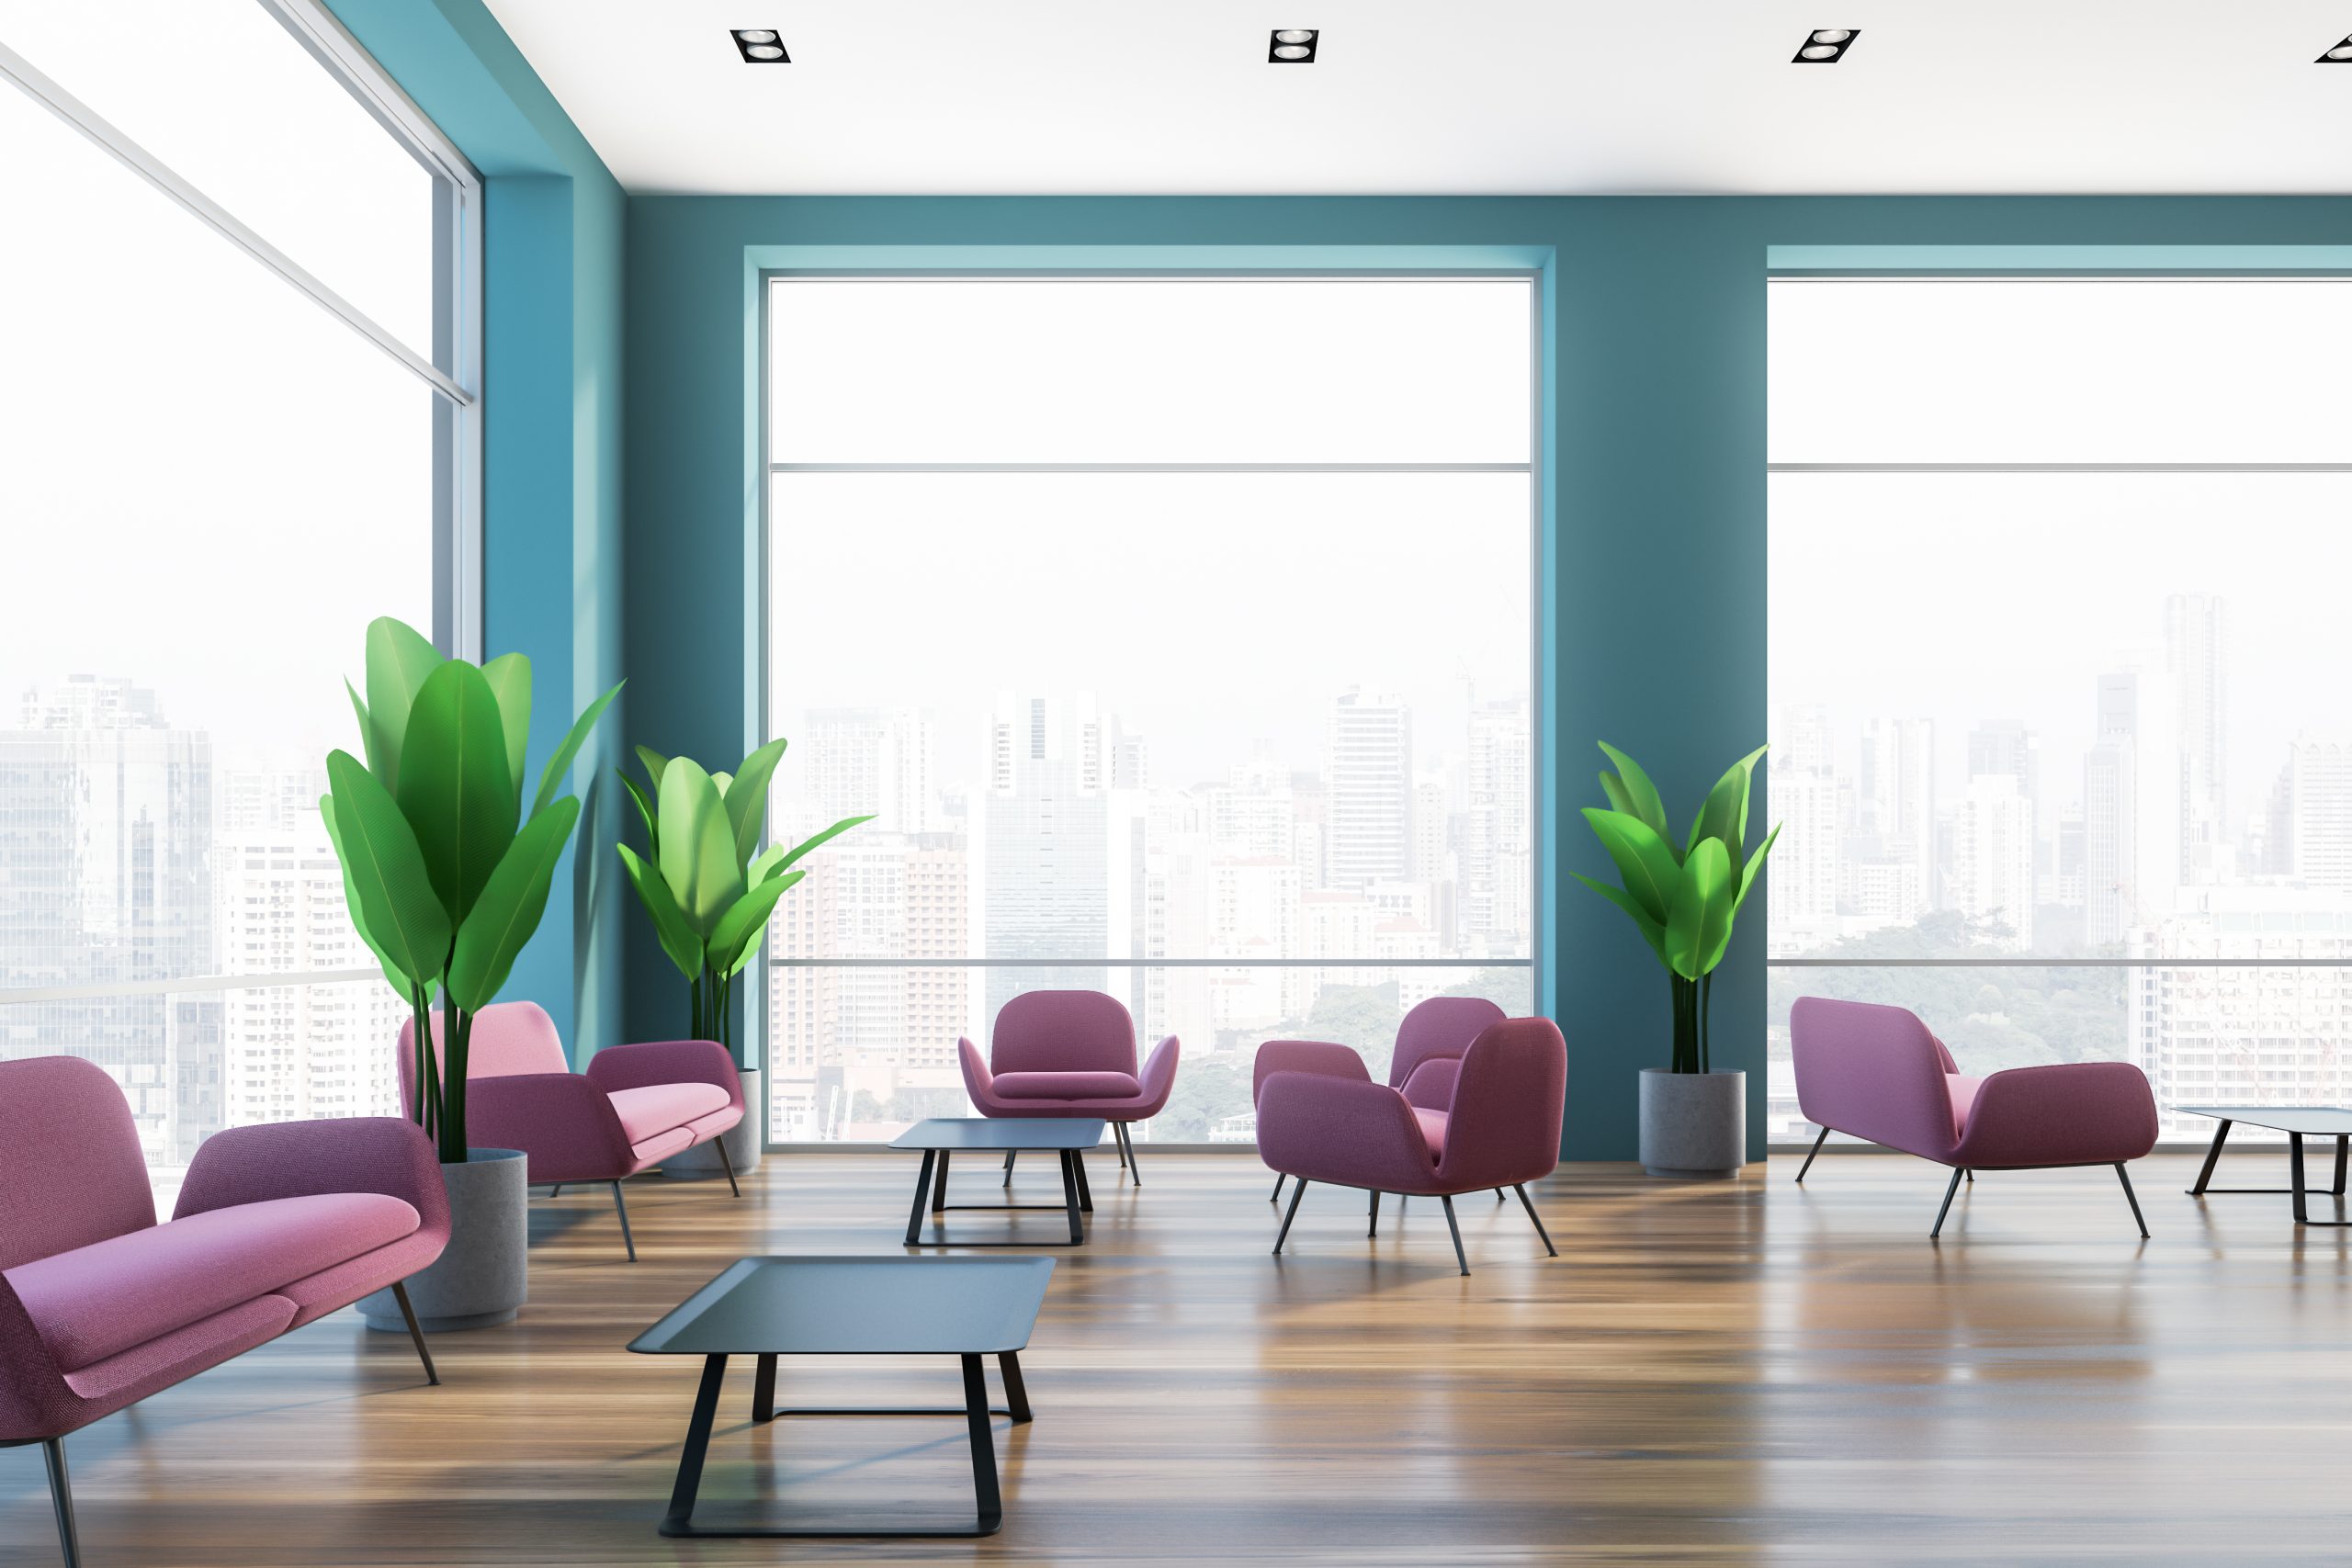 Trending Furniture Style Guide to Help You Style Your Office in 2020